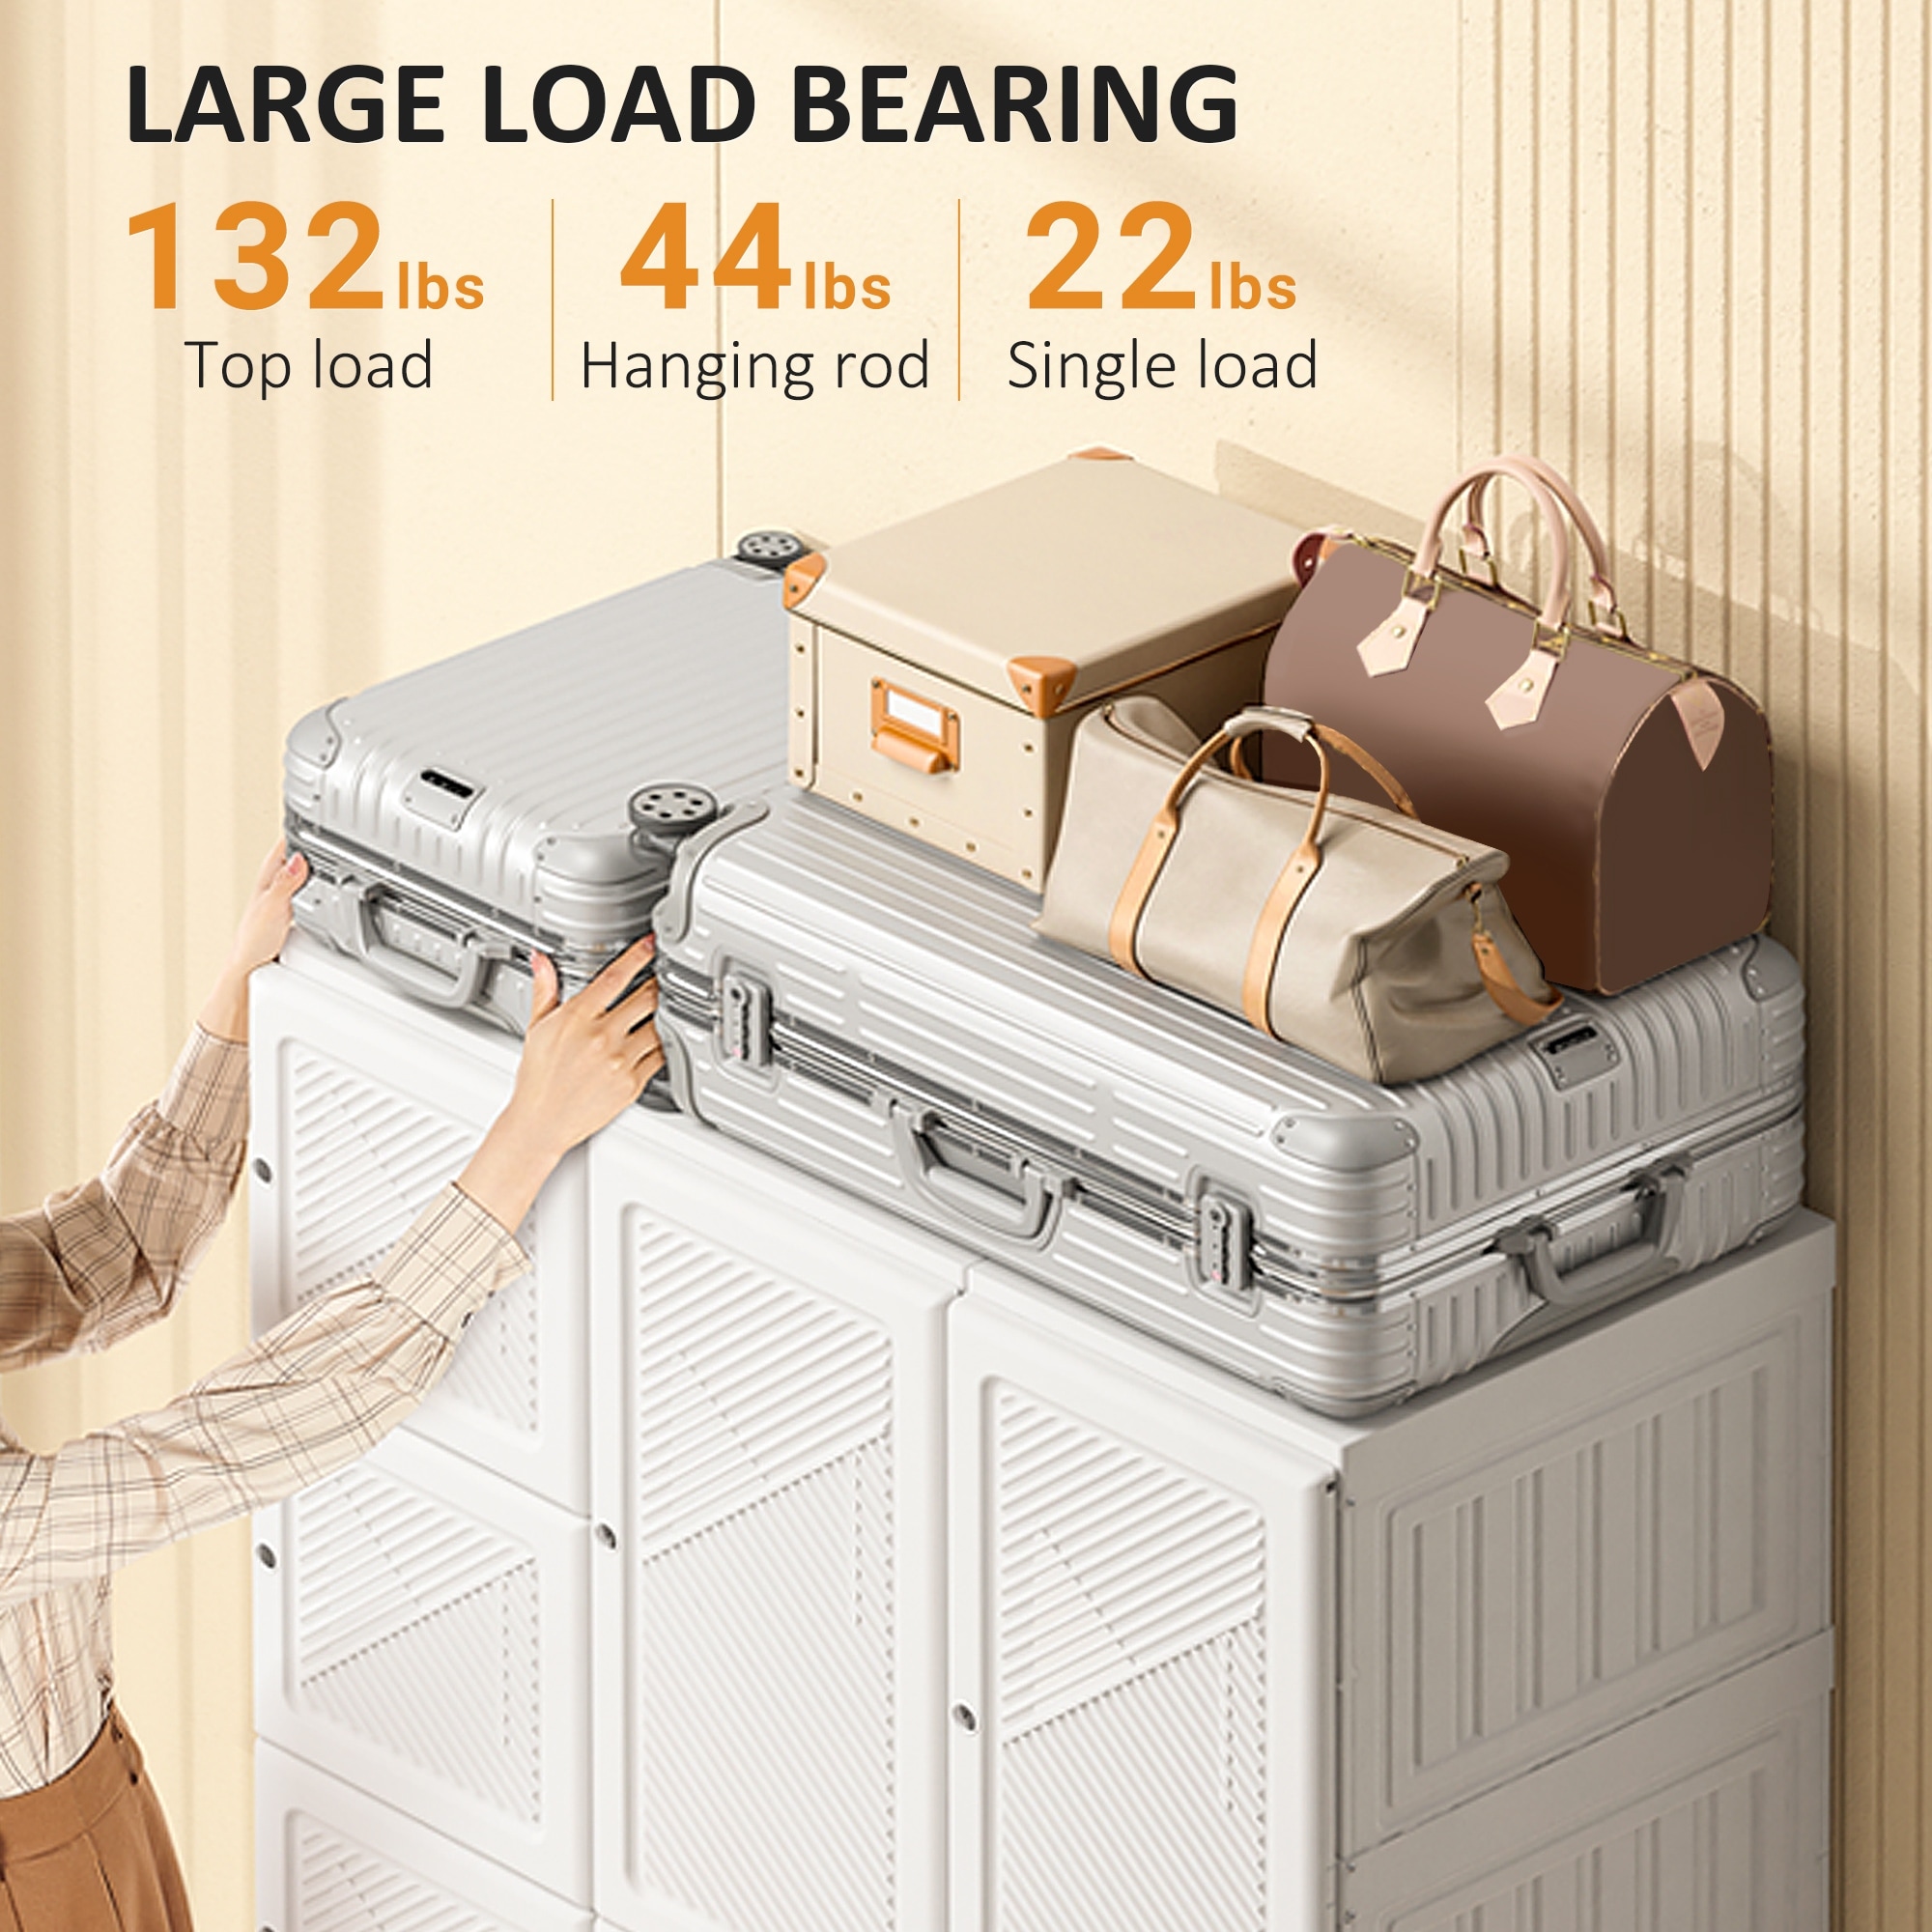 https://ak1.ostkcdn.com/images/products/is/images/direct/1075557e7c324acdbe075cd28723e2423cd99483/HOMCOM-Portable-Wardrobe-Closet%2C-Bedroom-Armoire%2C-Foldable-Clothes-Organizer-with-Cube-Storage%2C-Hanging-Rods%2C-and-Magnet-Doors.jpg